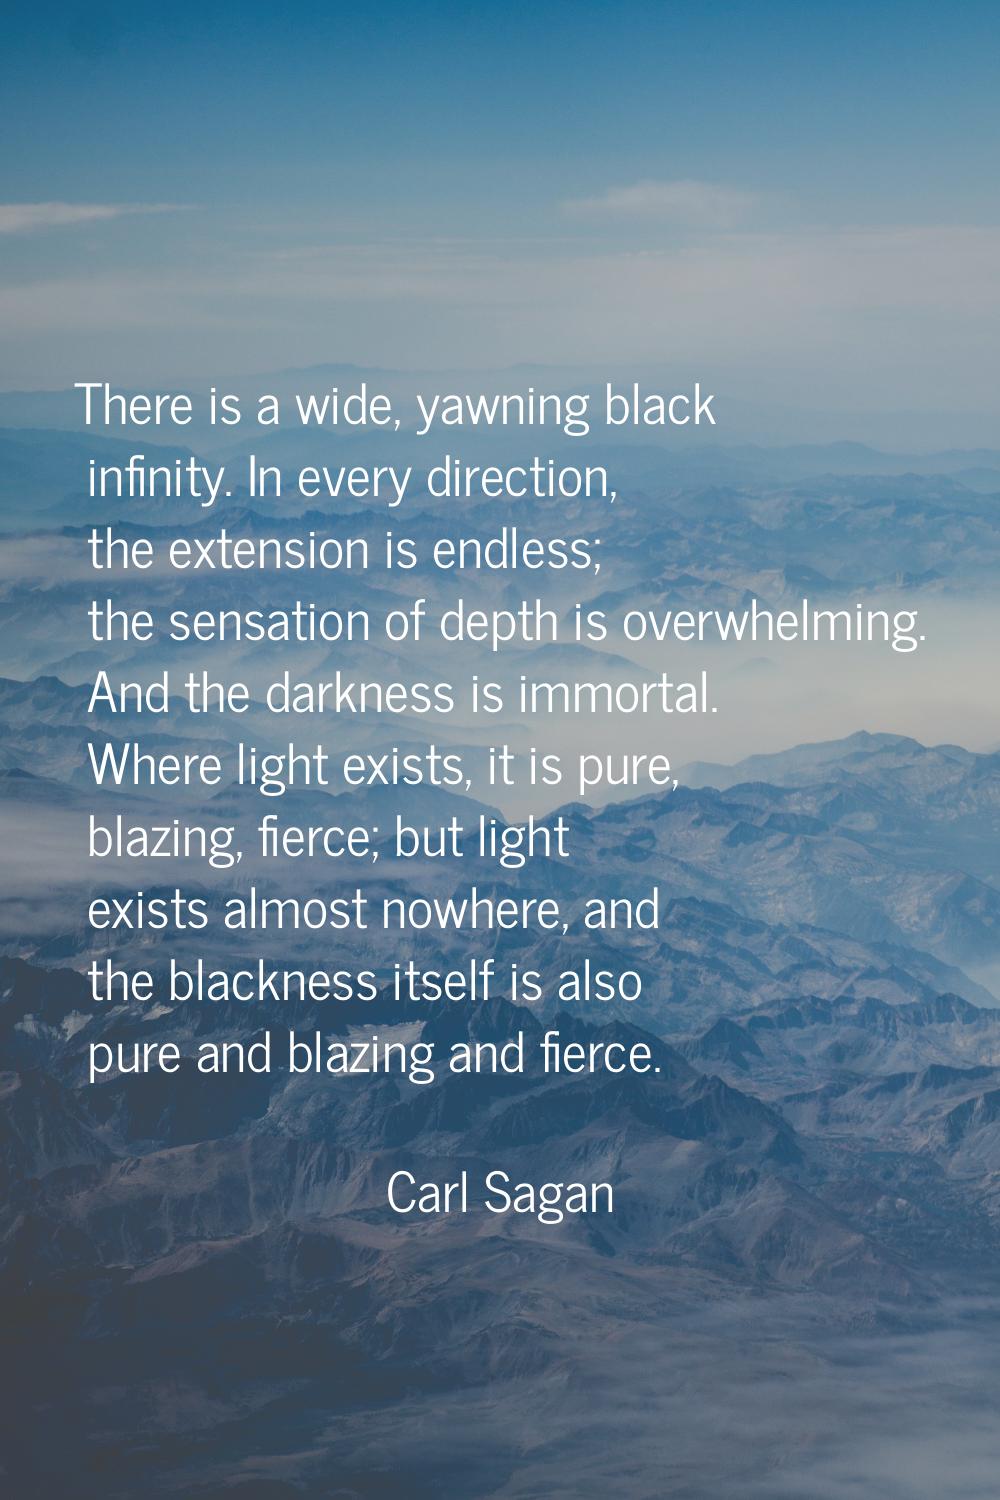 There is a wide, yawning black infinity. In every direction, the extension is endless; the sensatio